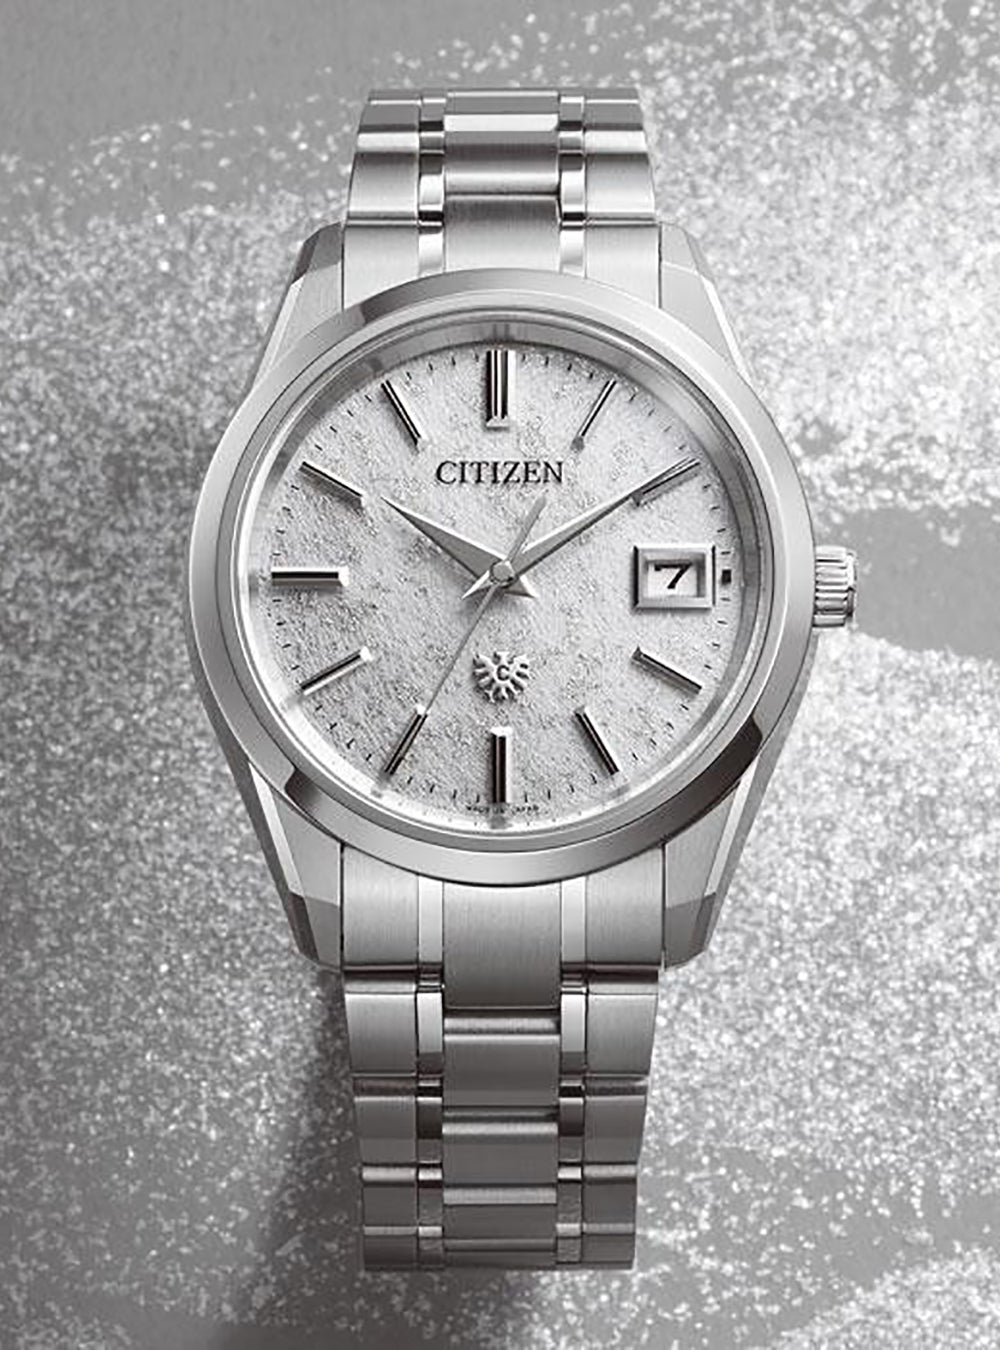 THE CITIZEN SUNAGO-MAKI WASHI DIAL MODEL AQ4100-65W LIMITED EDITION MADE IN JAPAN JDMWRISTWATCHjapan-select